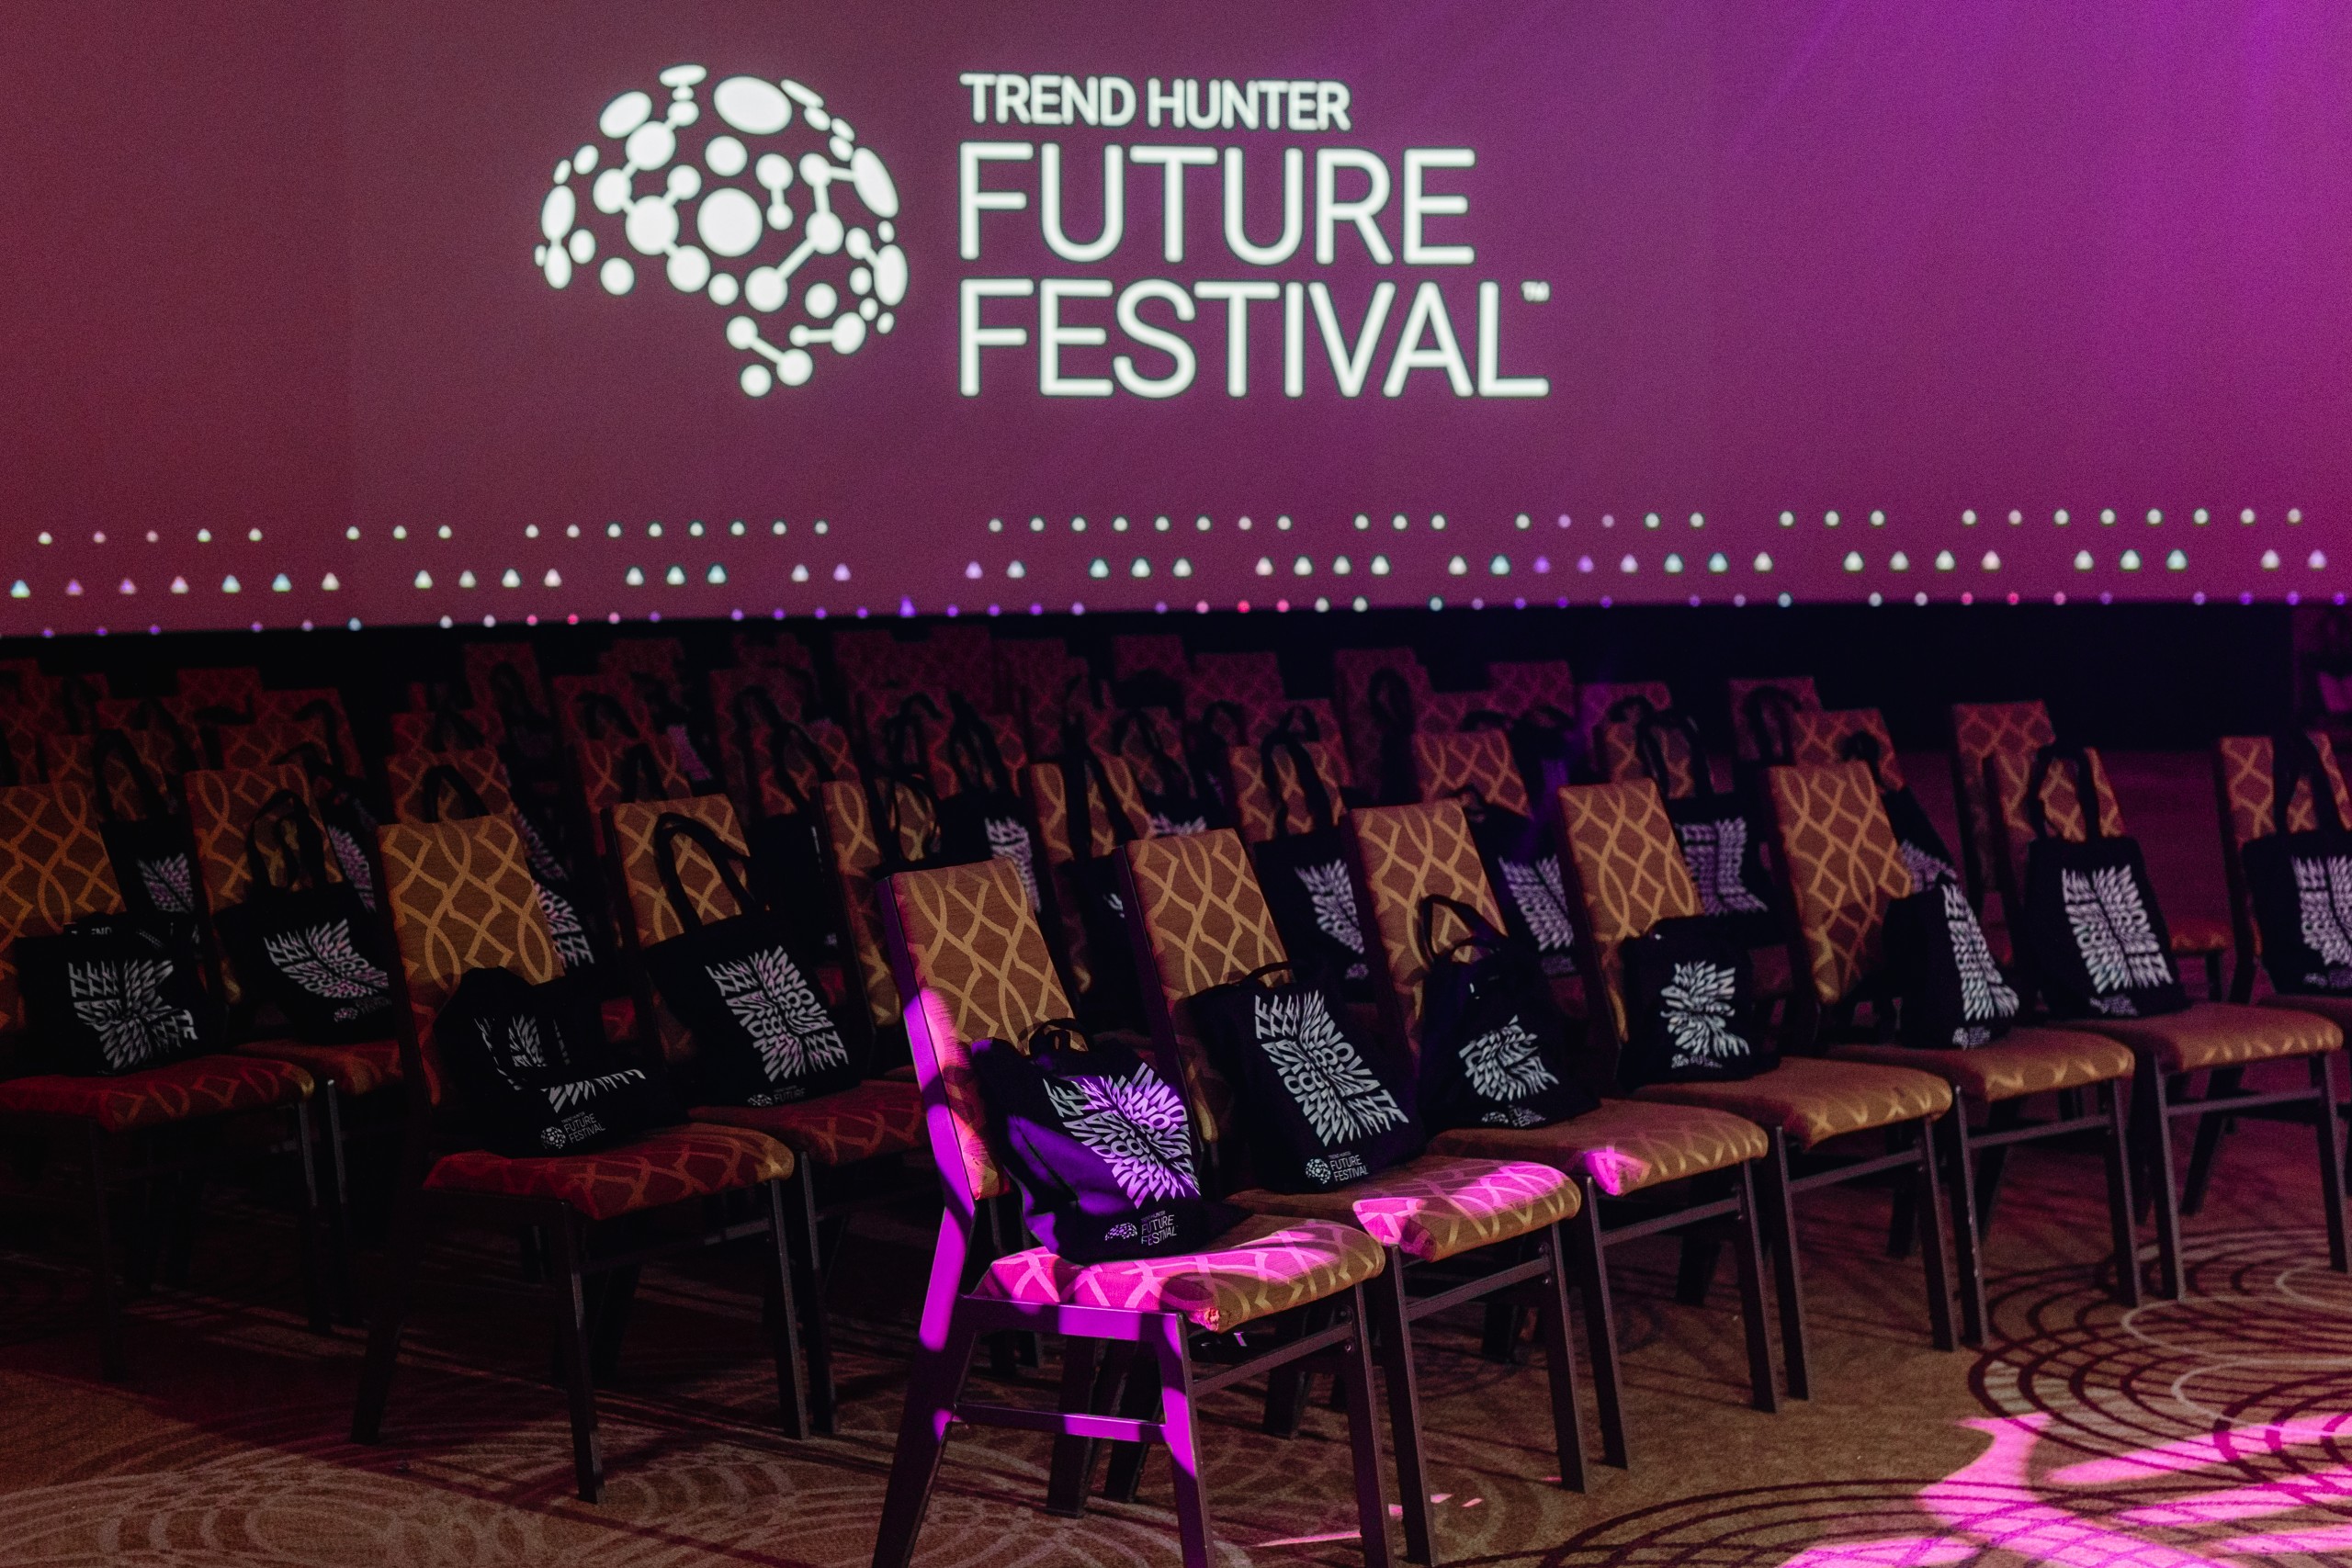 A room full of chairs with the words future festival on them, perfect for event photography.